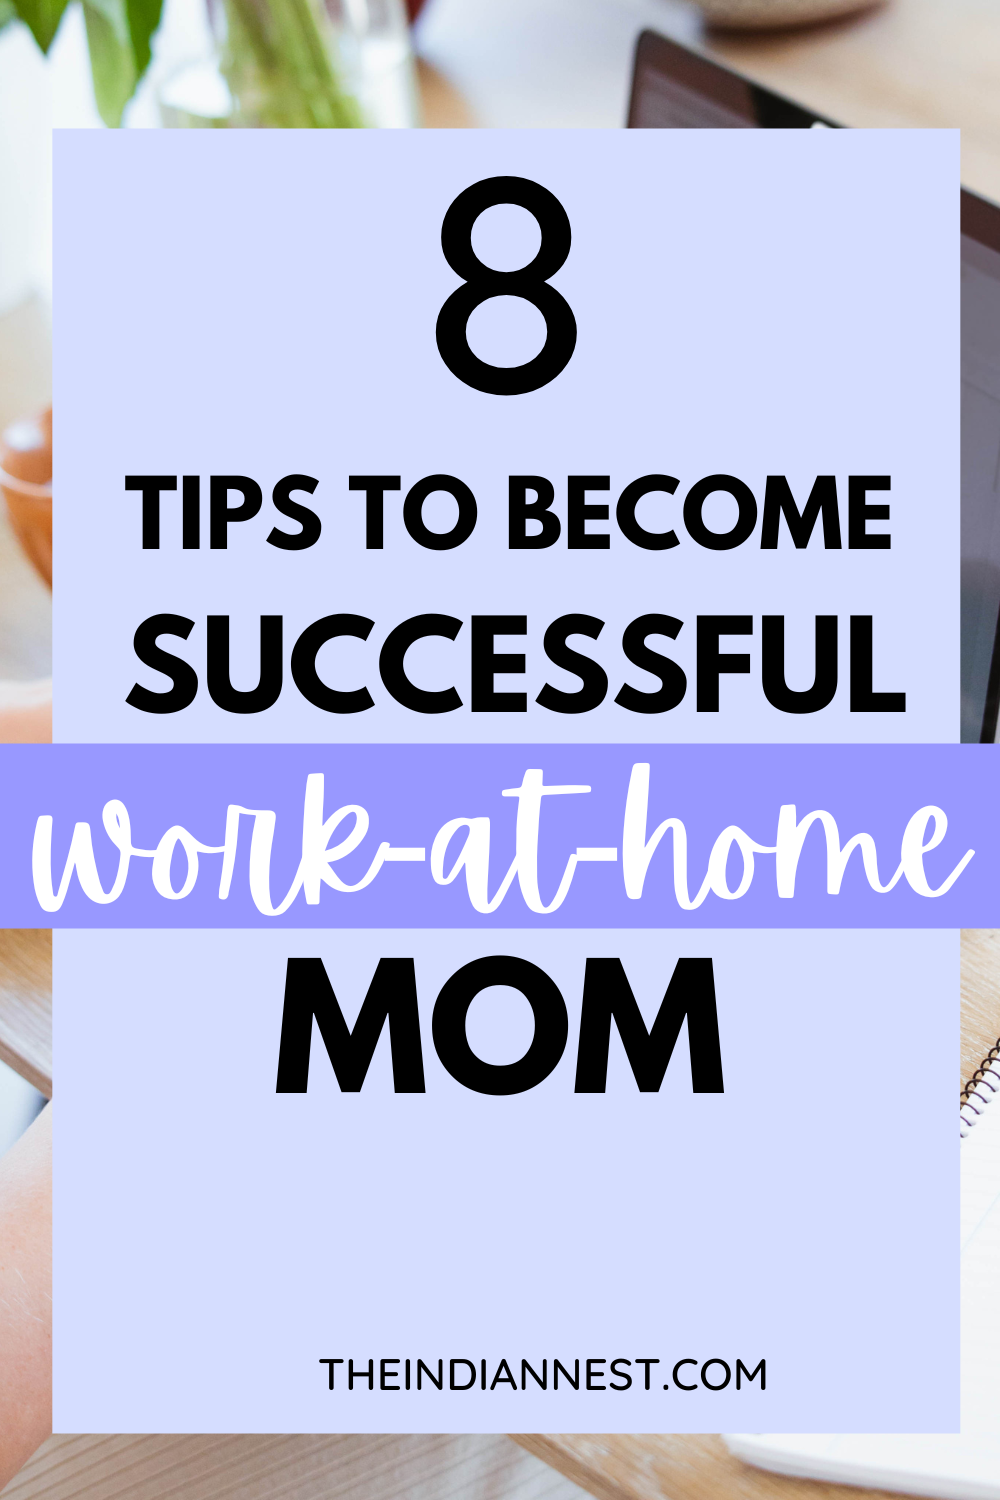 For many mothers, especially those with young children, working from home can be the best way to balance your family's need for your income. Here you have amazing tips for mom to become work-at-home mom.